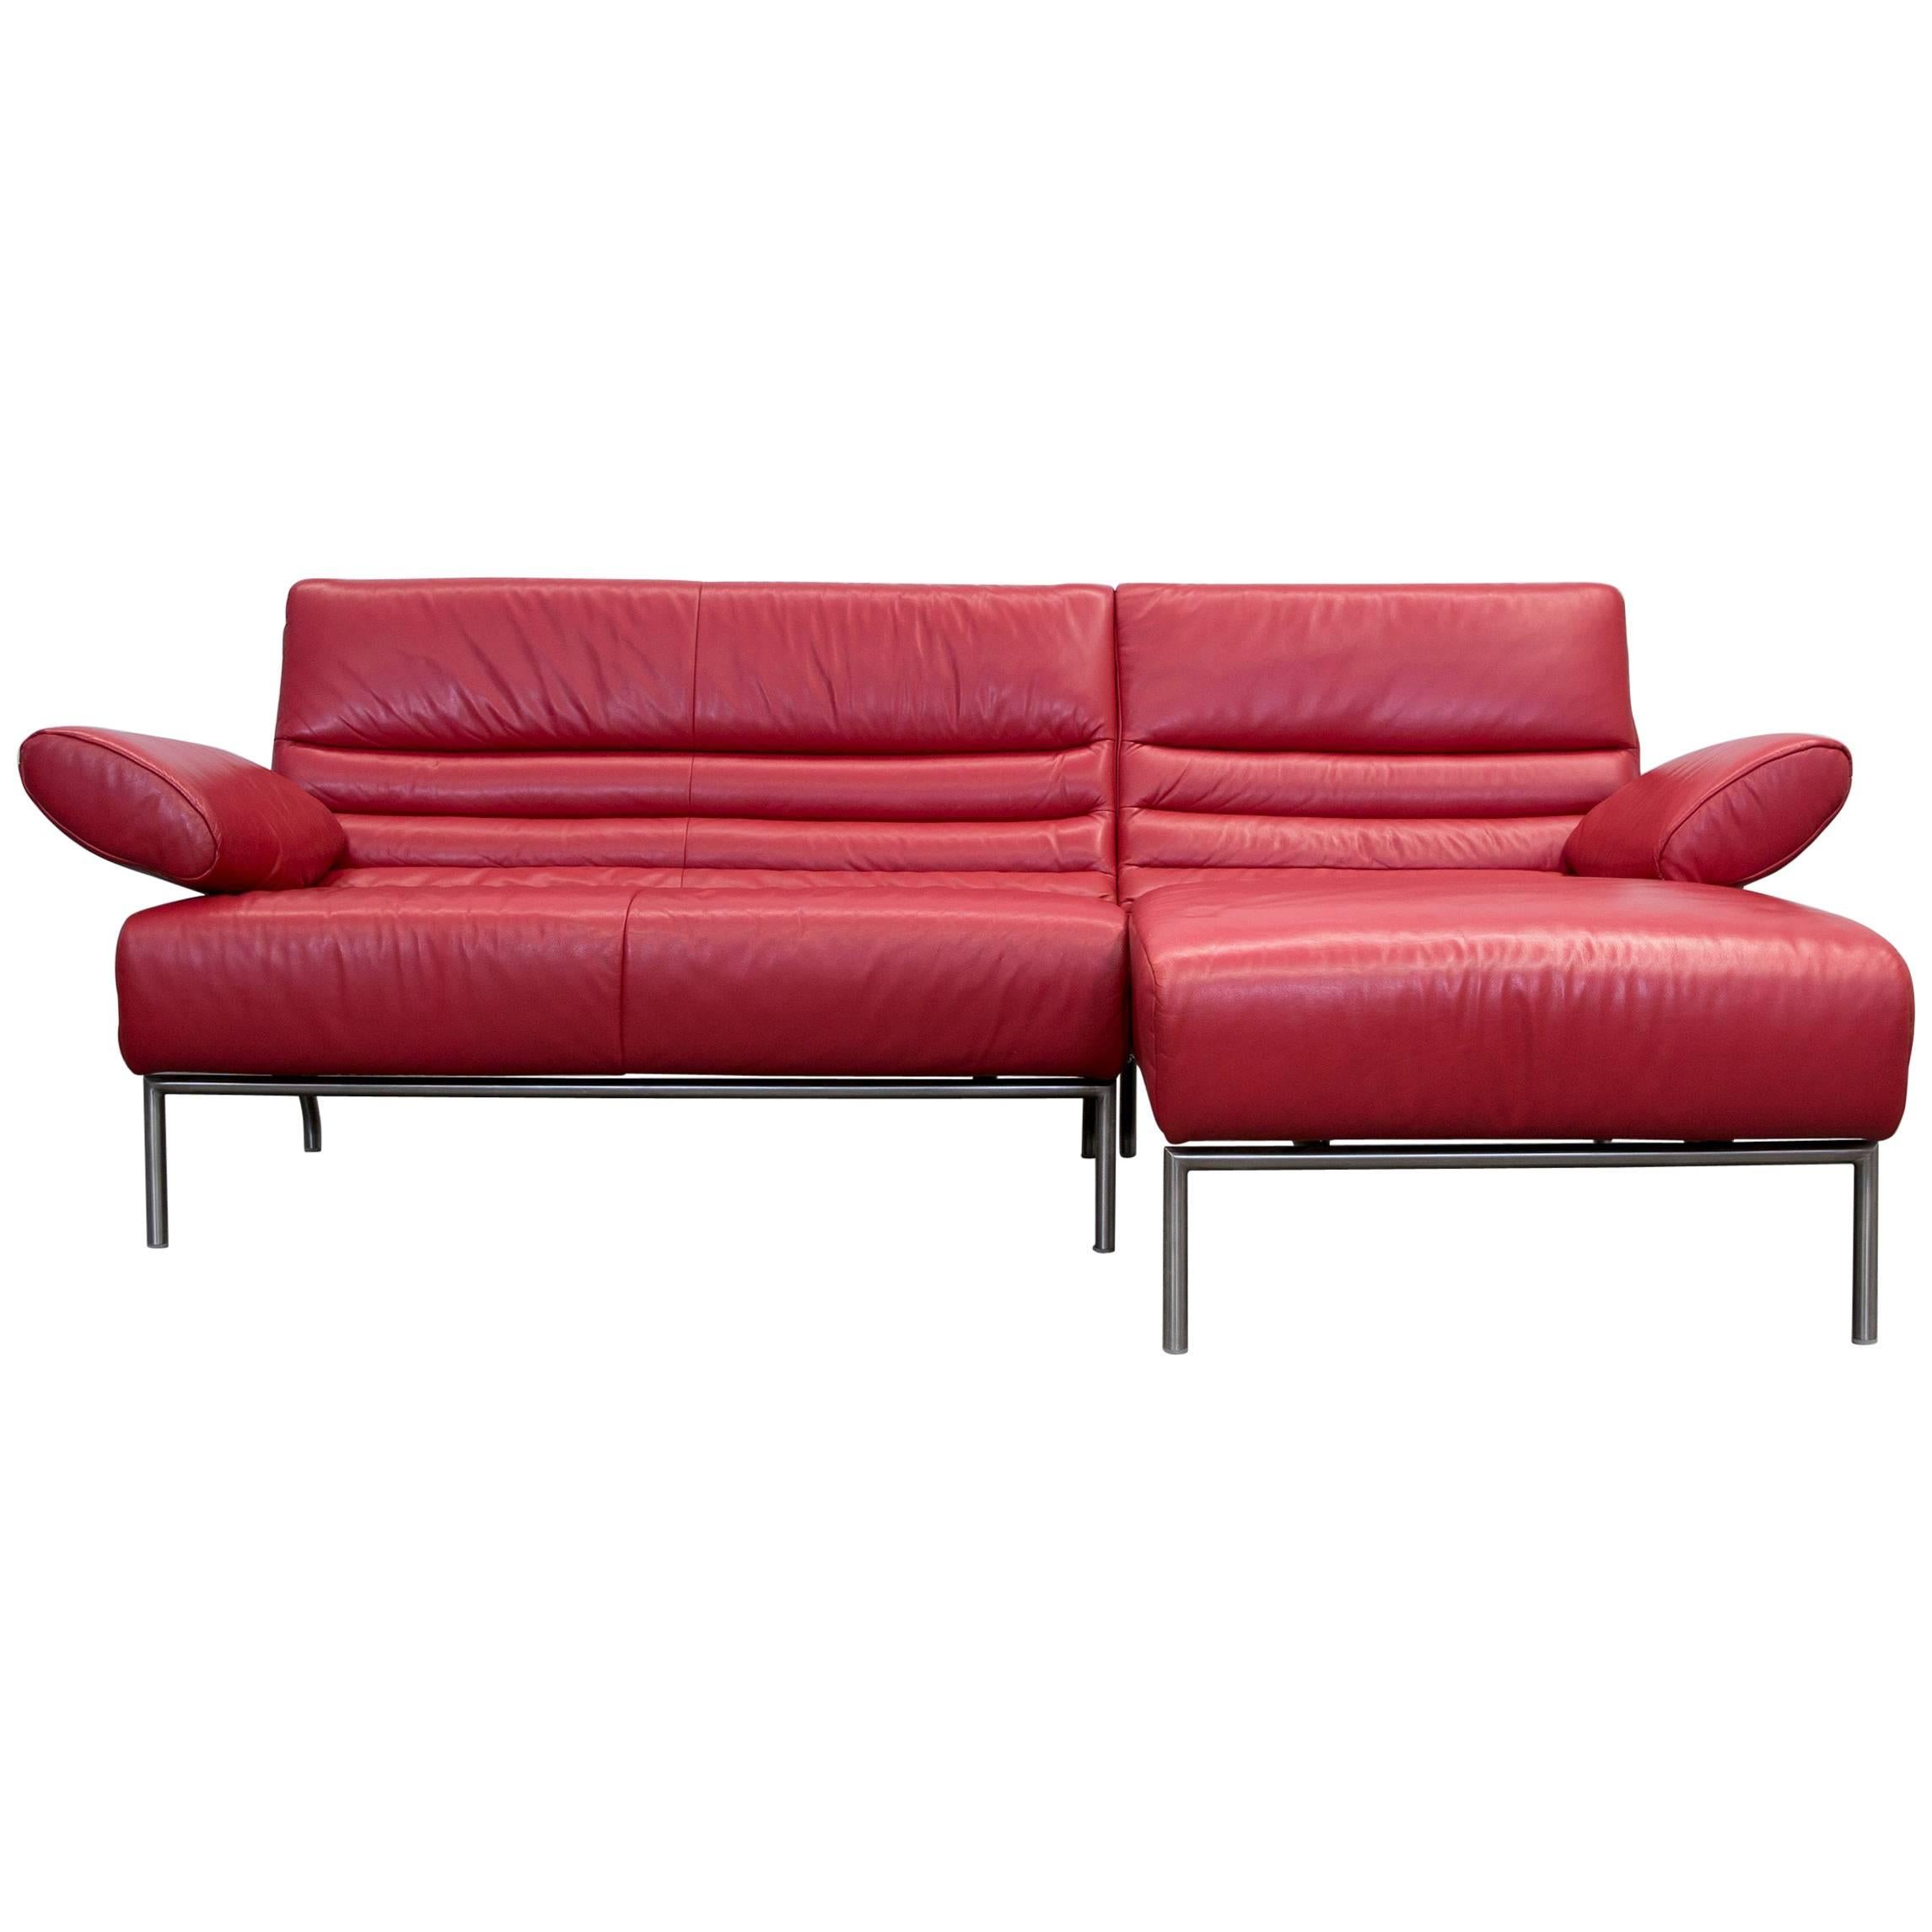 Koinor Design Leather Corner Couch Red Function Modern